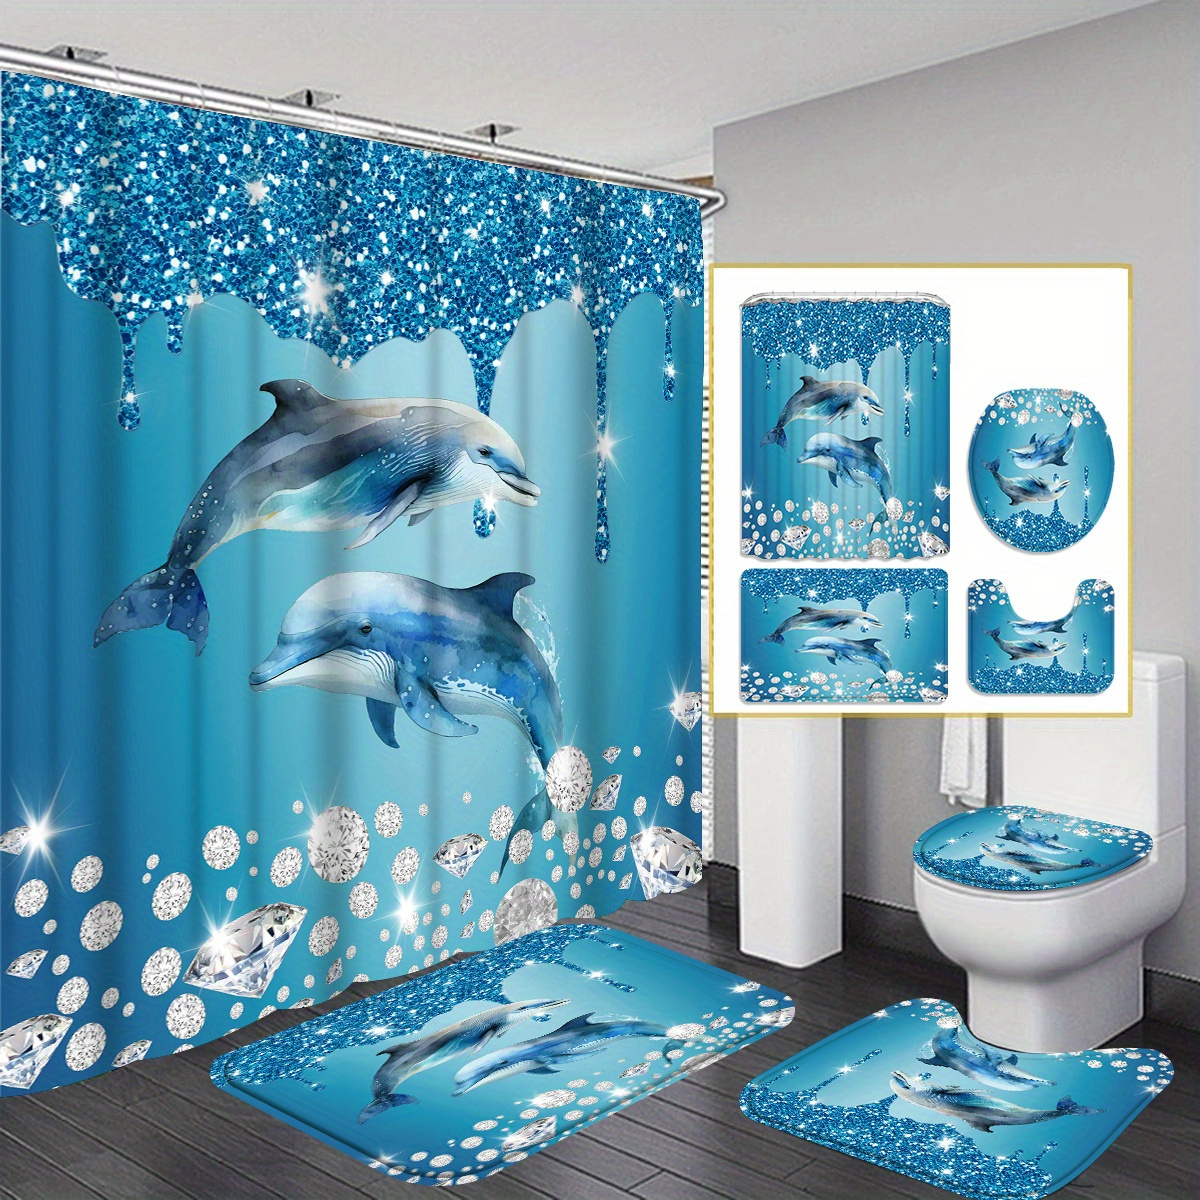 

4pcs Diamonds And Shower Curtain Gift Modern Home Bathroom Decoration Curtain And Toilet Floor Mat 3-piece Set With 12 Shower Curtain Hooks